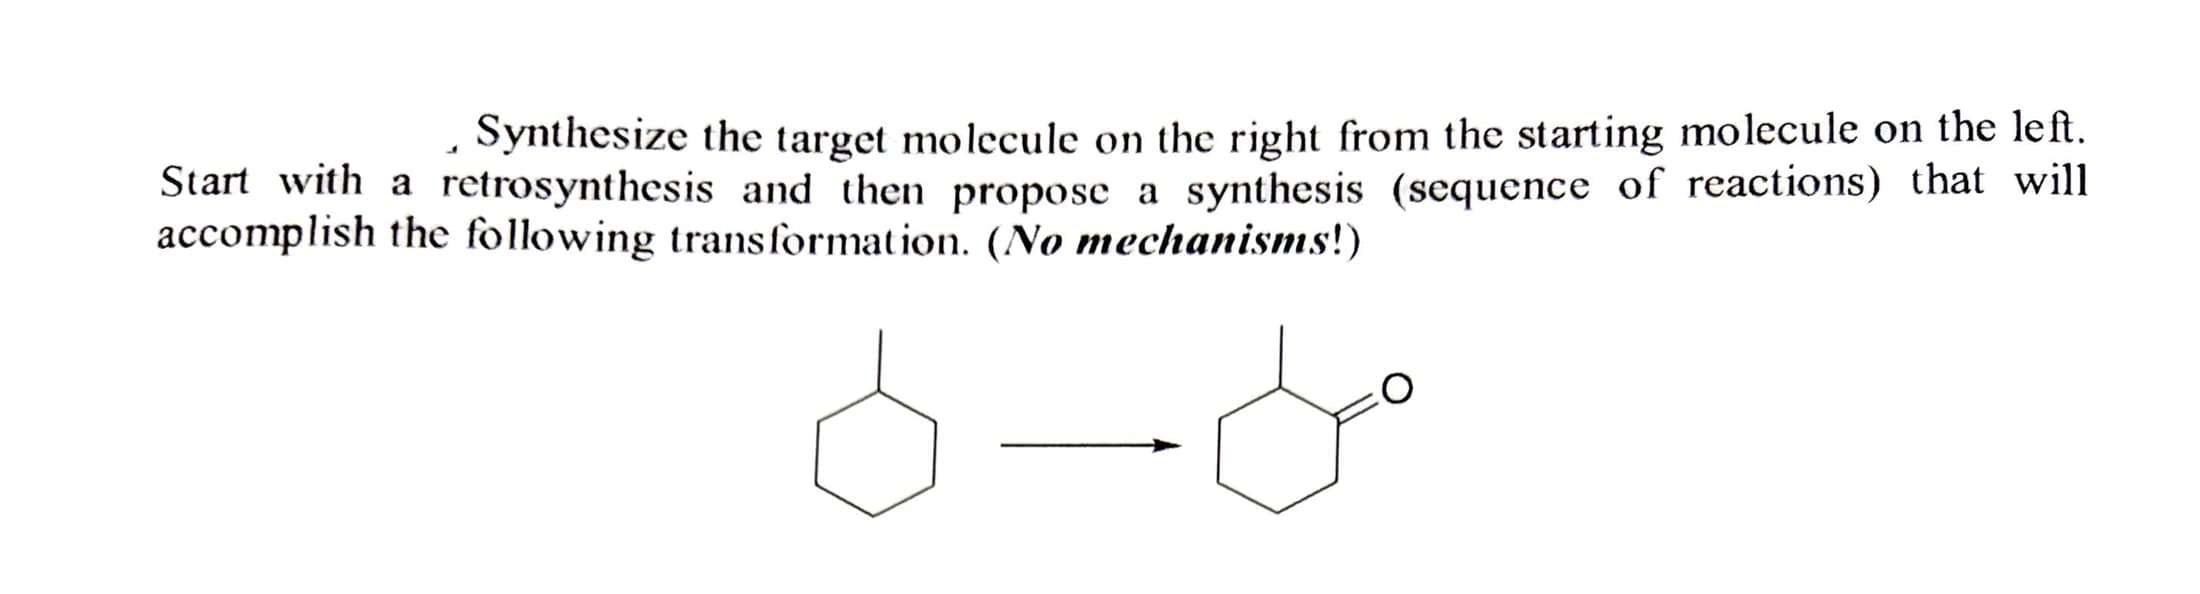 Synthesize the target molecule on the right from the starting molecule on the left.
Start with a retrosynthesis and then propose a synthesis (sequence of reactions) that will
accomplish the following transformation. (No mechanisms!)
